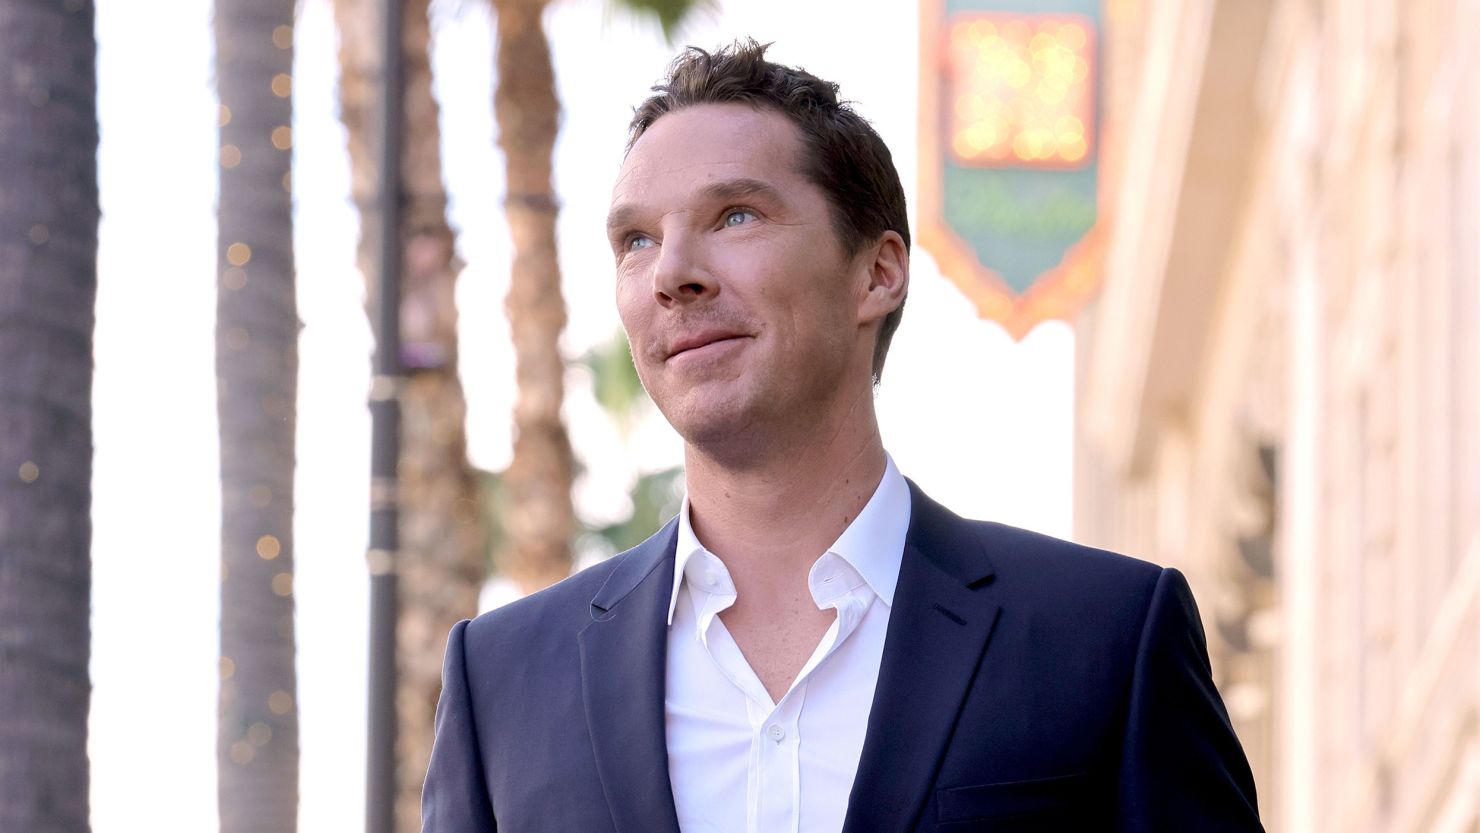 Benedict Cumberbatch, seen here attending the Hollywood Walk of Fame Star Ceremony on February 28, 2022 in Hollywood, California, thinks films like "Power of the Dog" have thee power to create change and conversation.